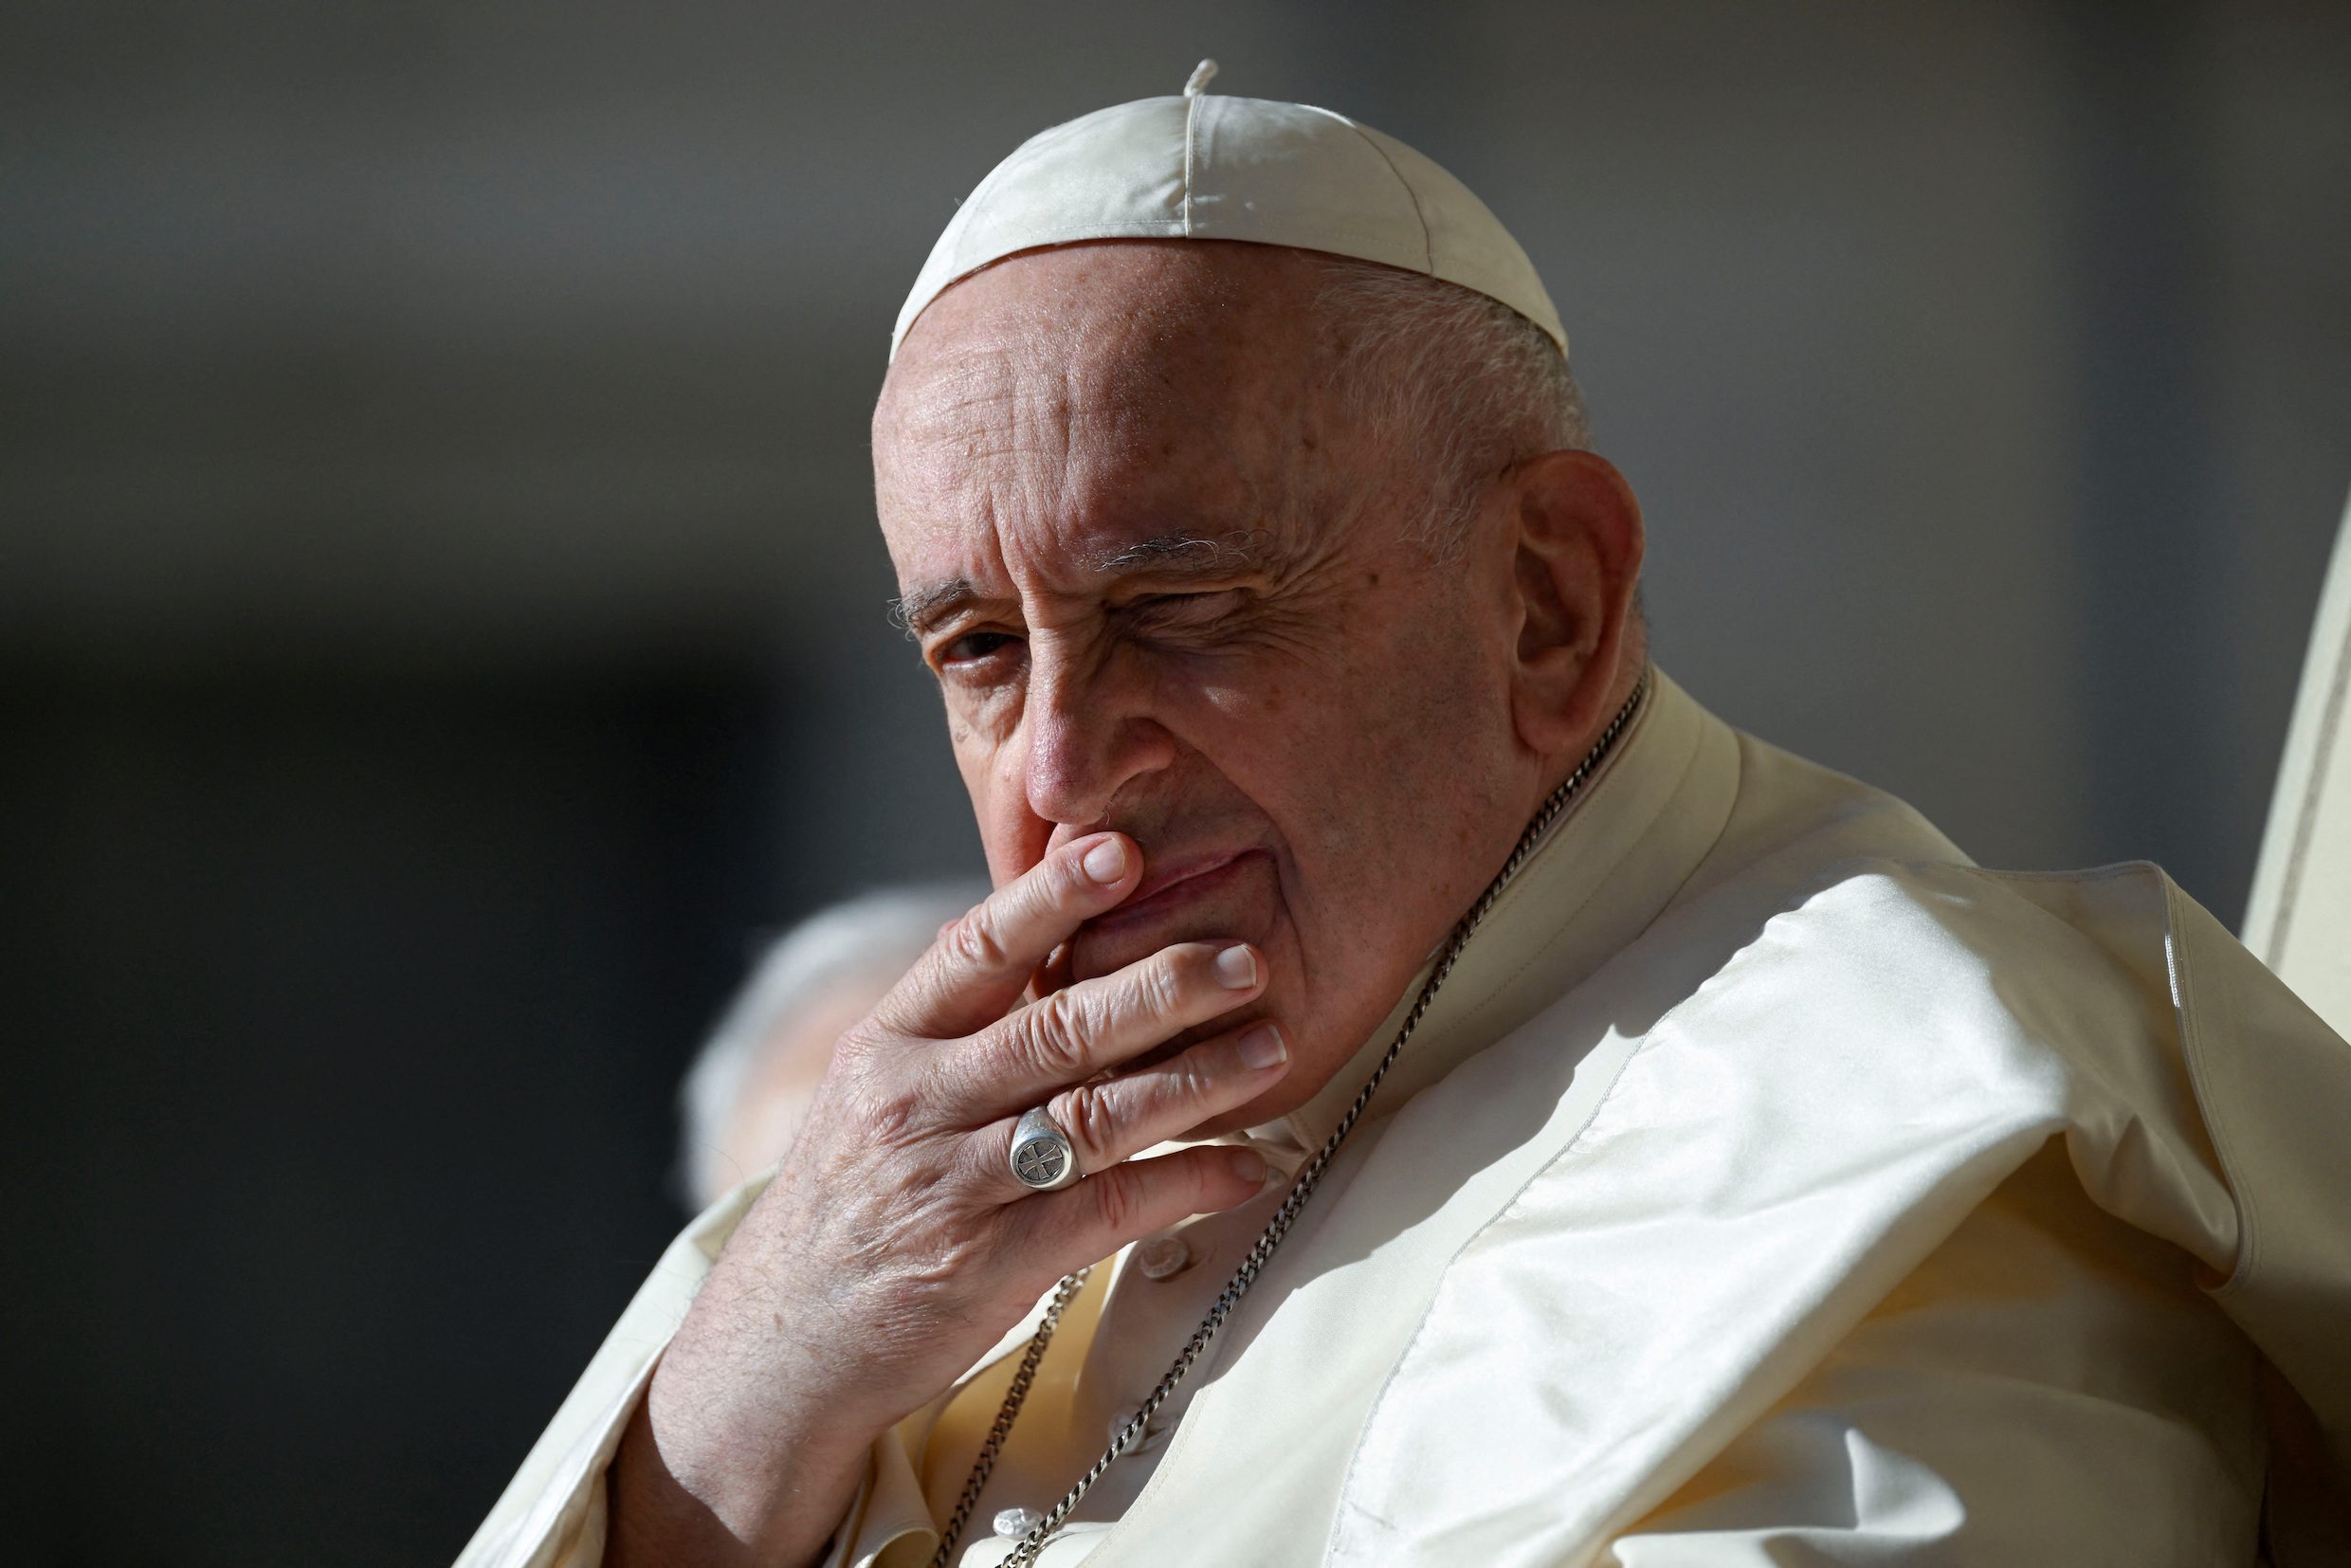 Pope Francis says it is ‘madness’ to think of using nuclear weapons in Ukraine